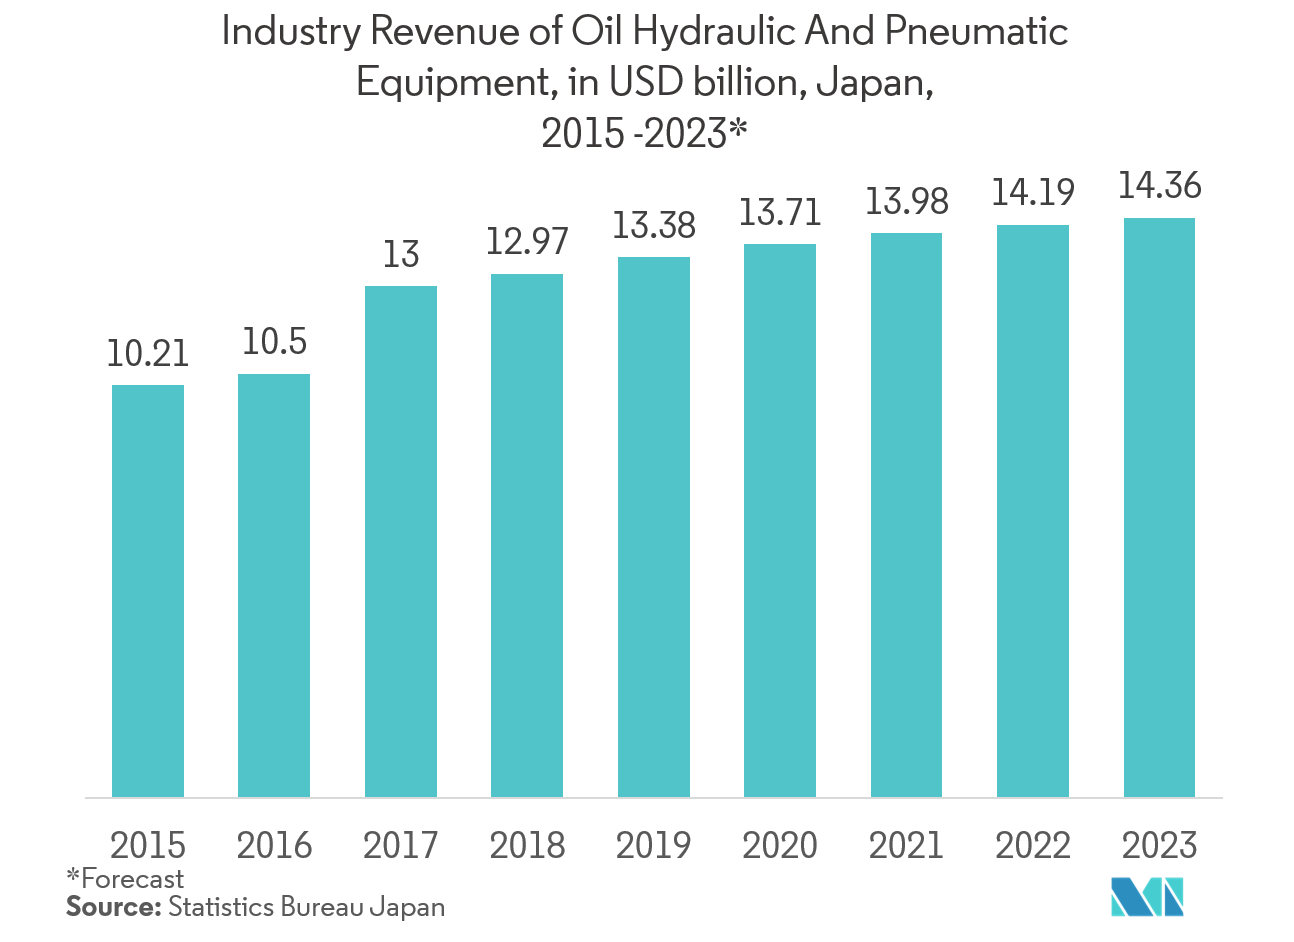 Industry Revenue of Oil Hydraulic And Pneumatic Equipment, in USD billion, Japan, 2015 - 2023